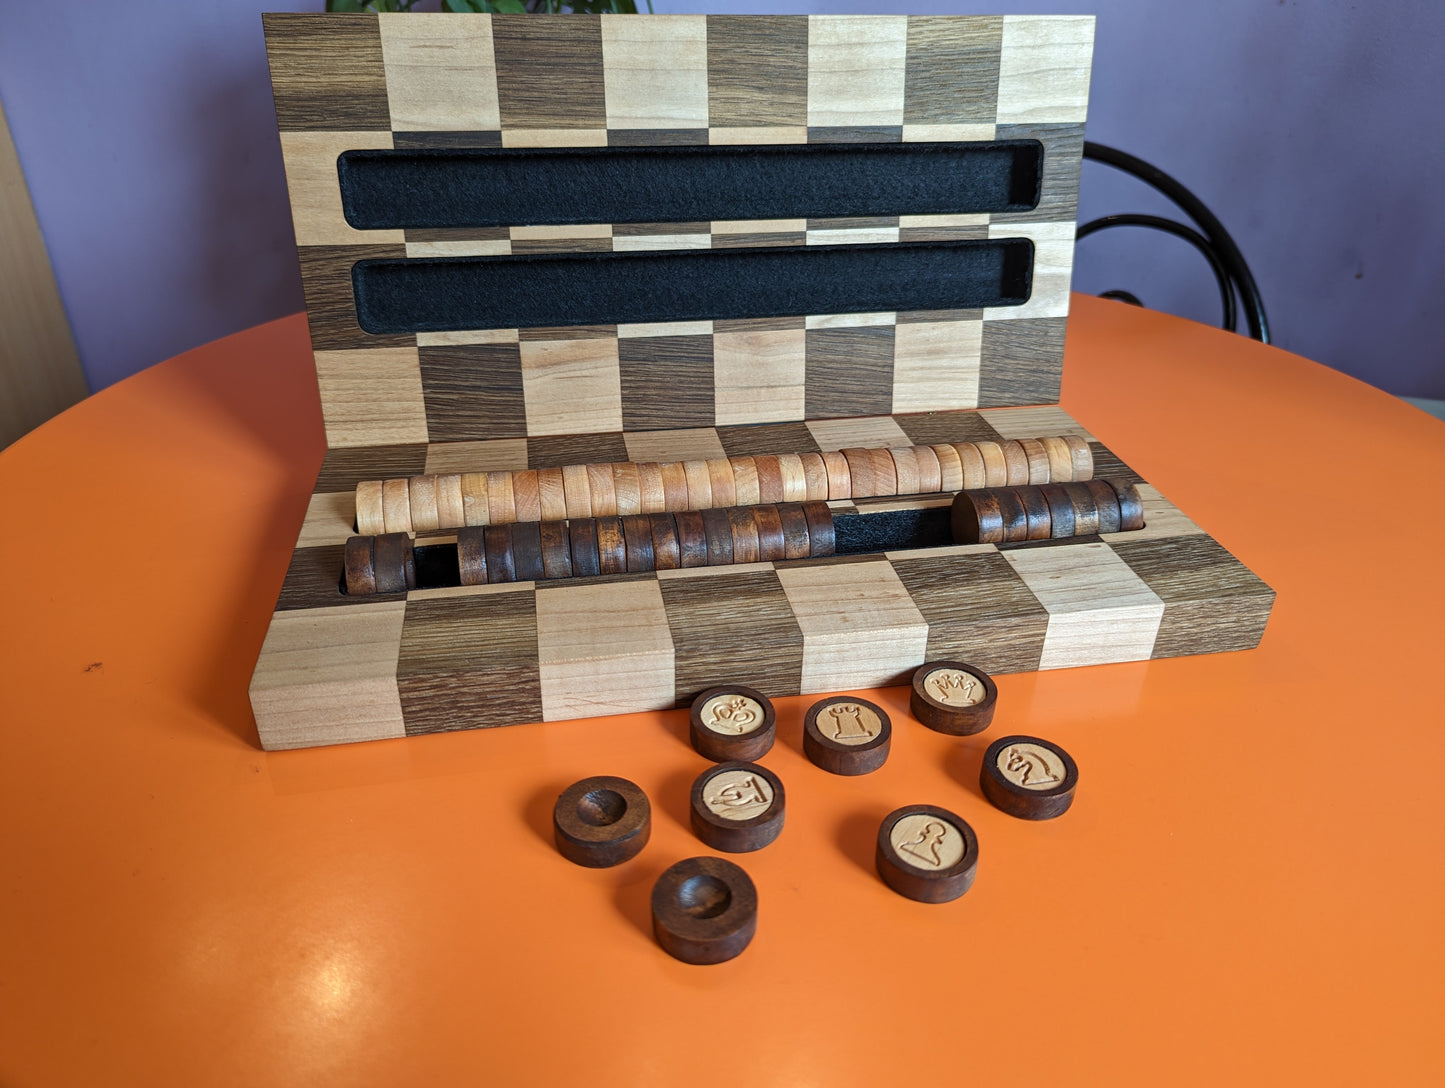 Portable checkers&chess set. Foldable wooden chessboard. Flat chess